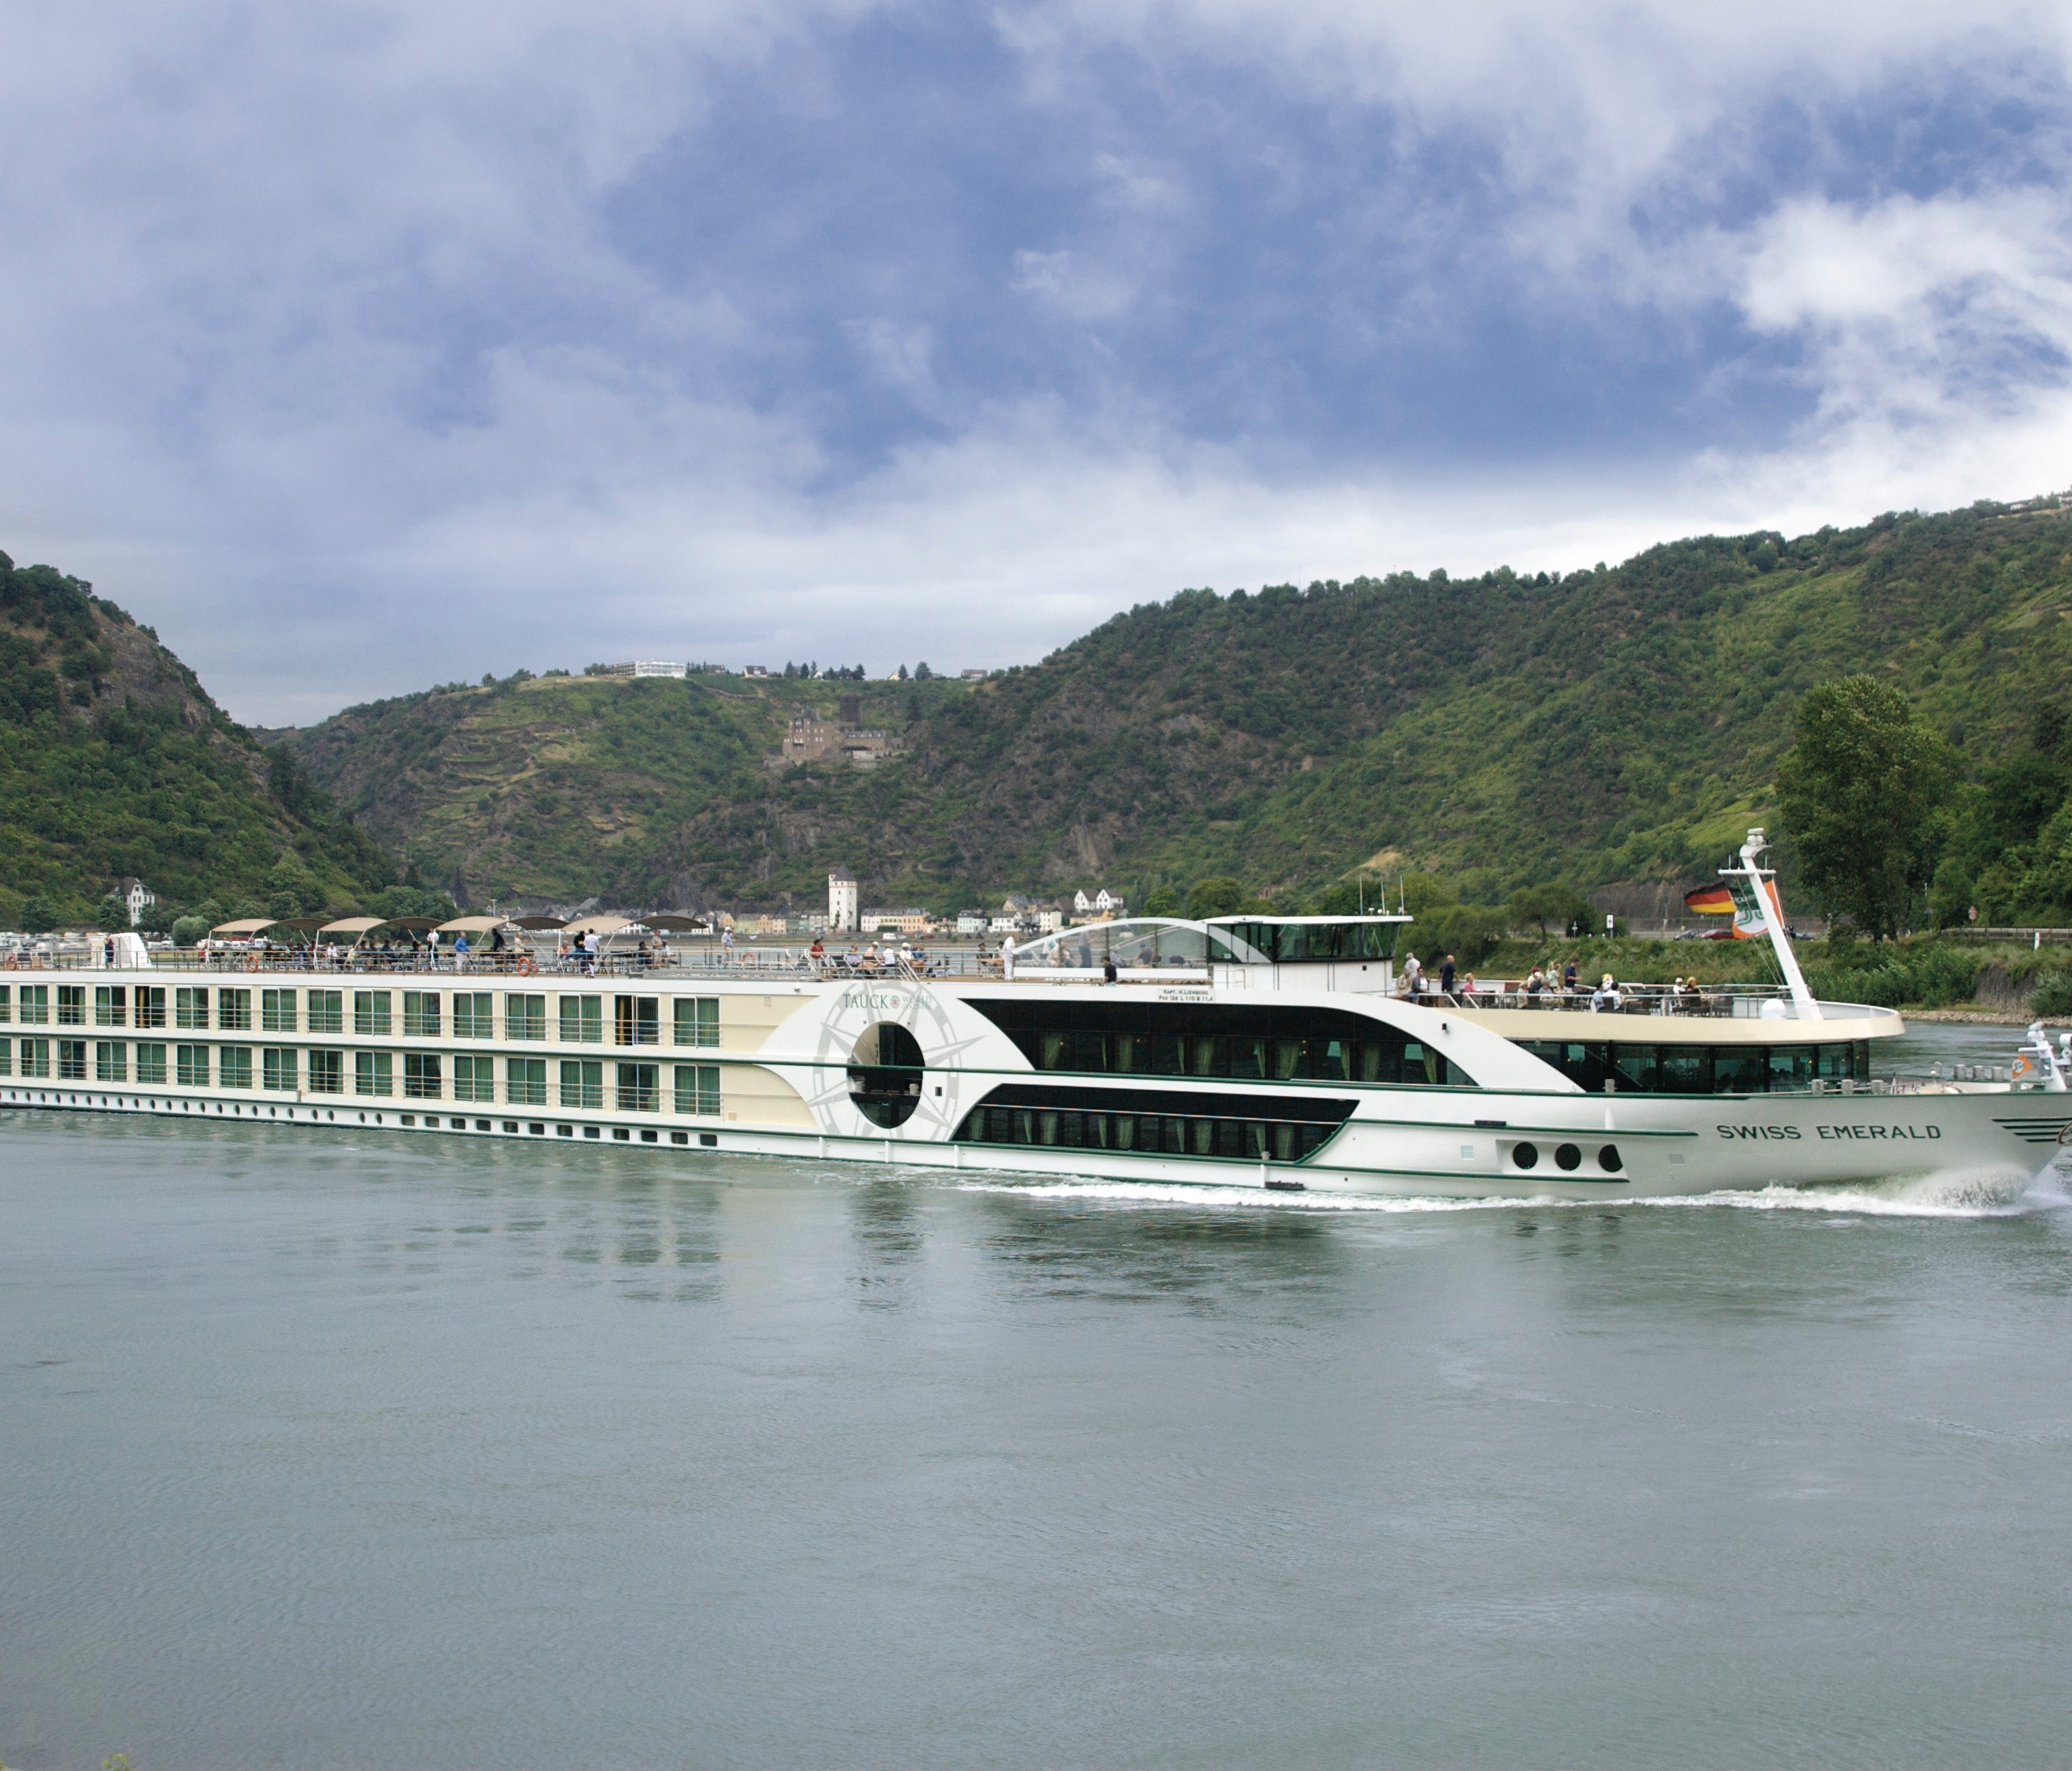 Tour company Tauck's river ship Emerald sails on the Rhone River in France.